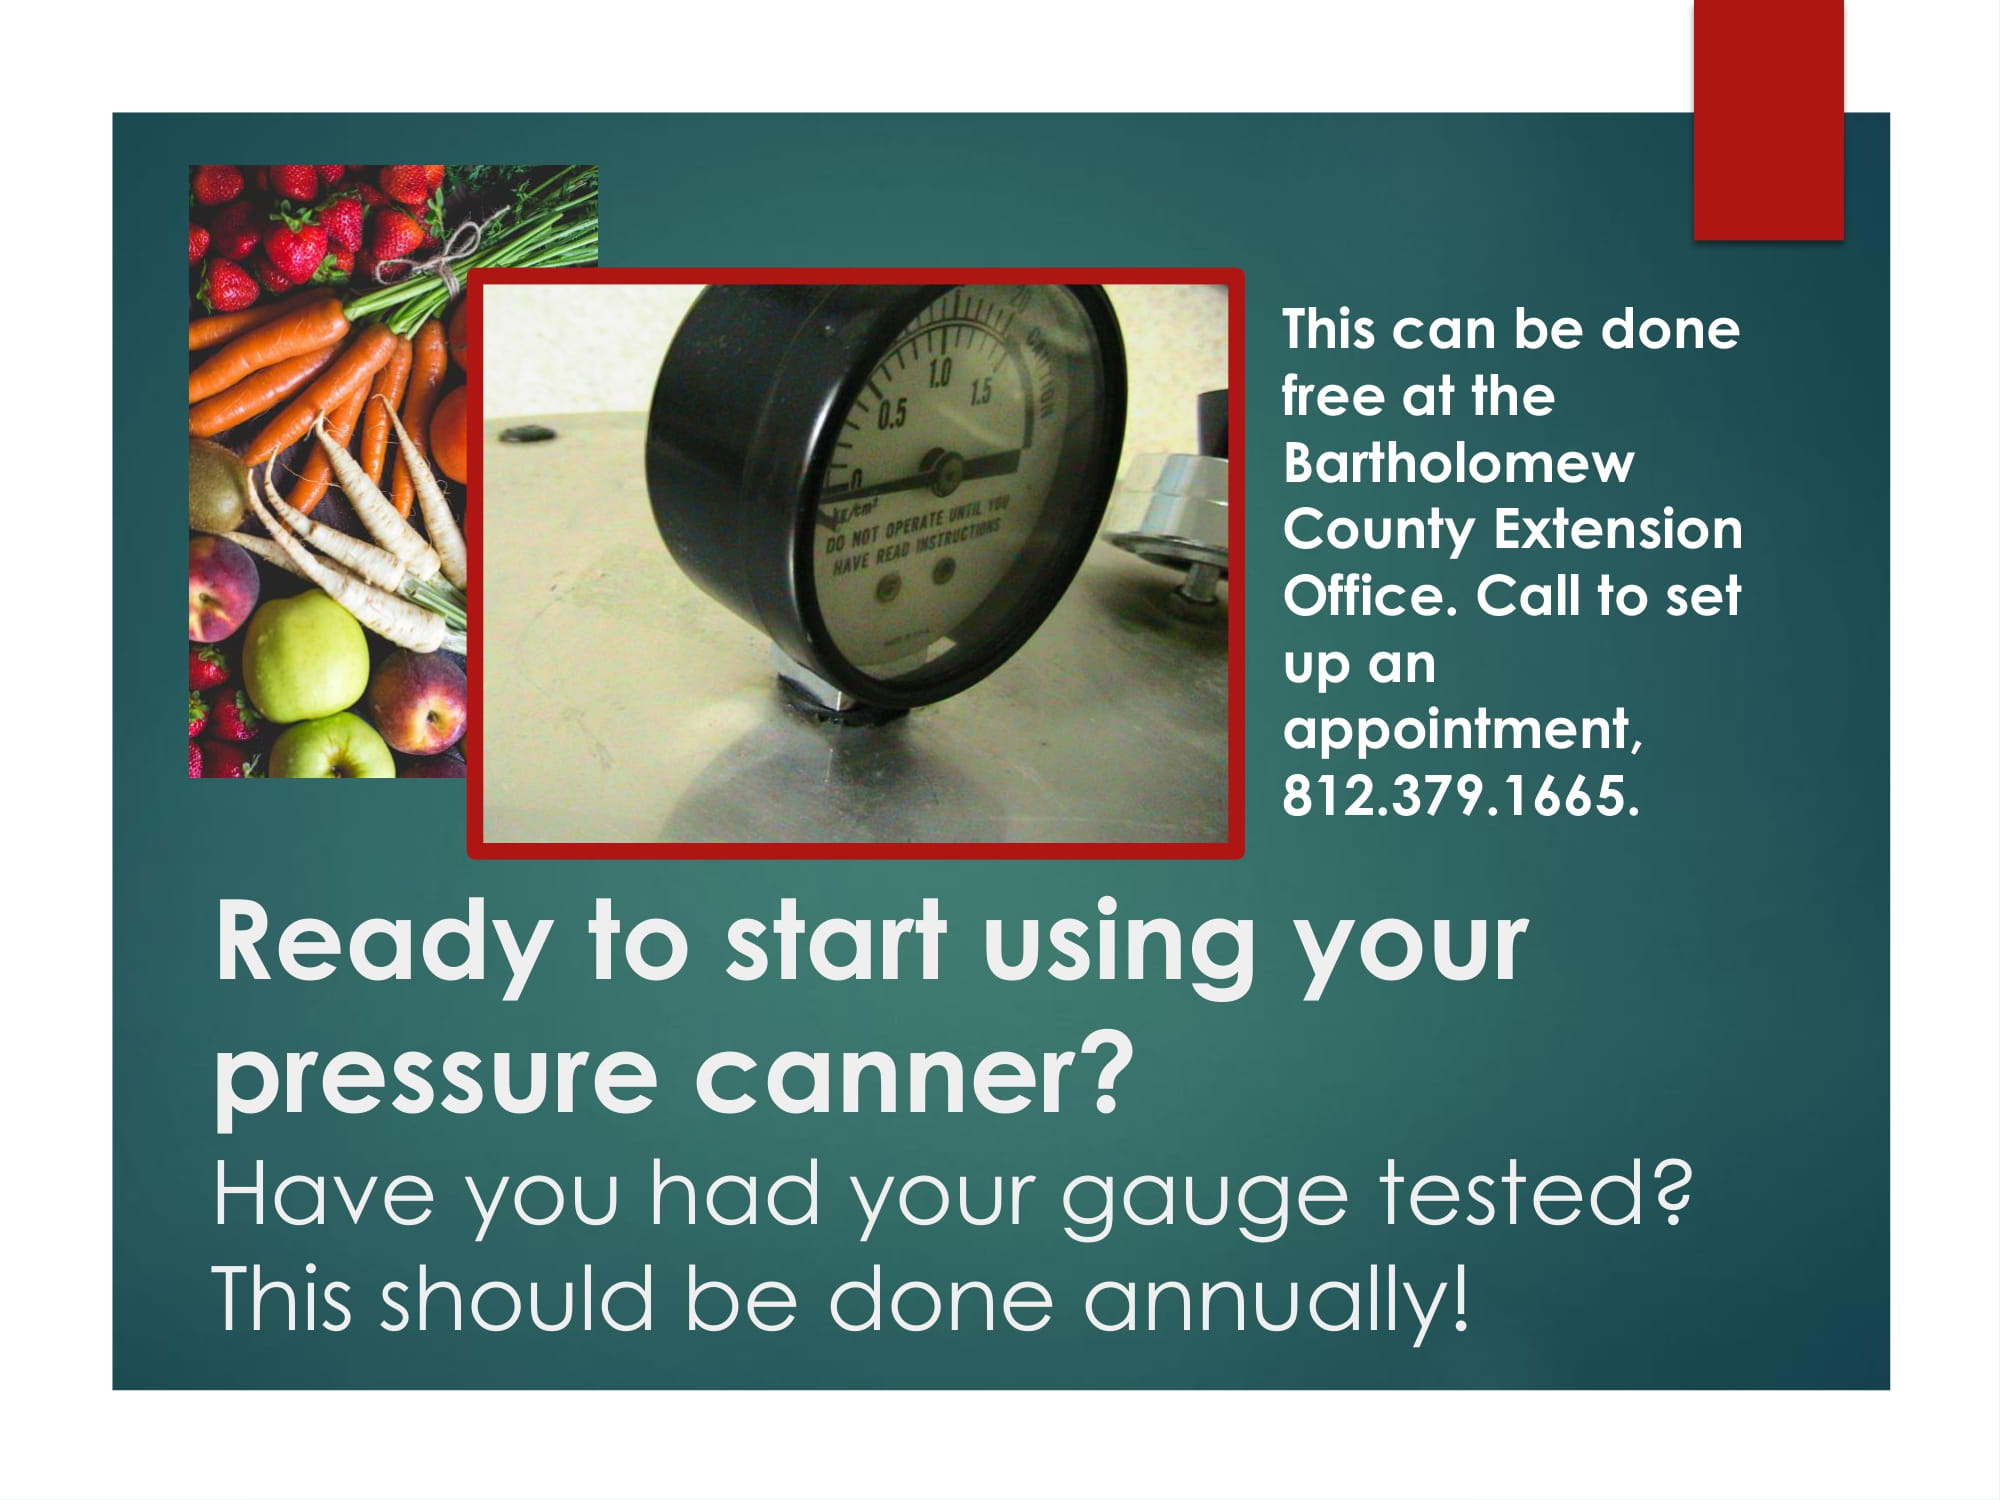 Ready-to-start-using-your-pressure-canner-1.jpg